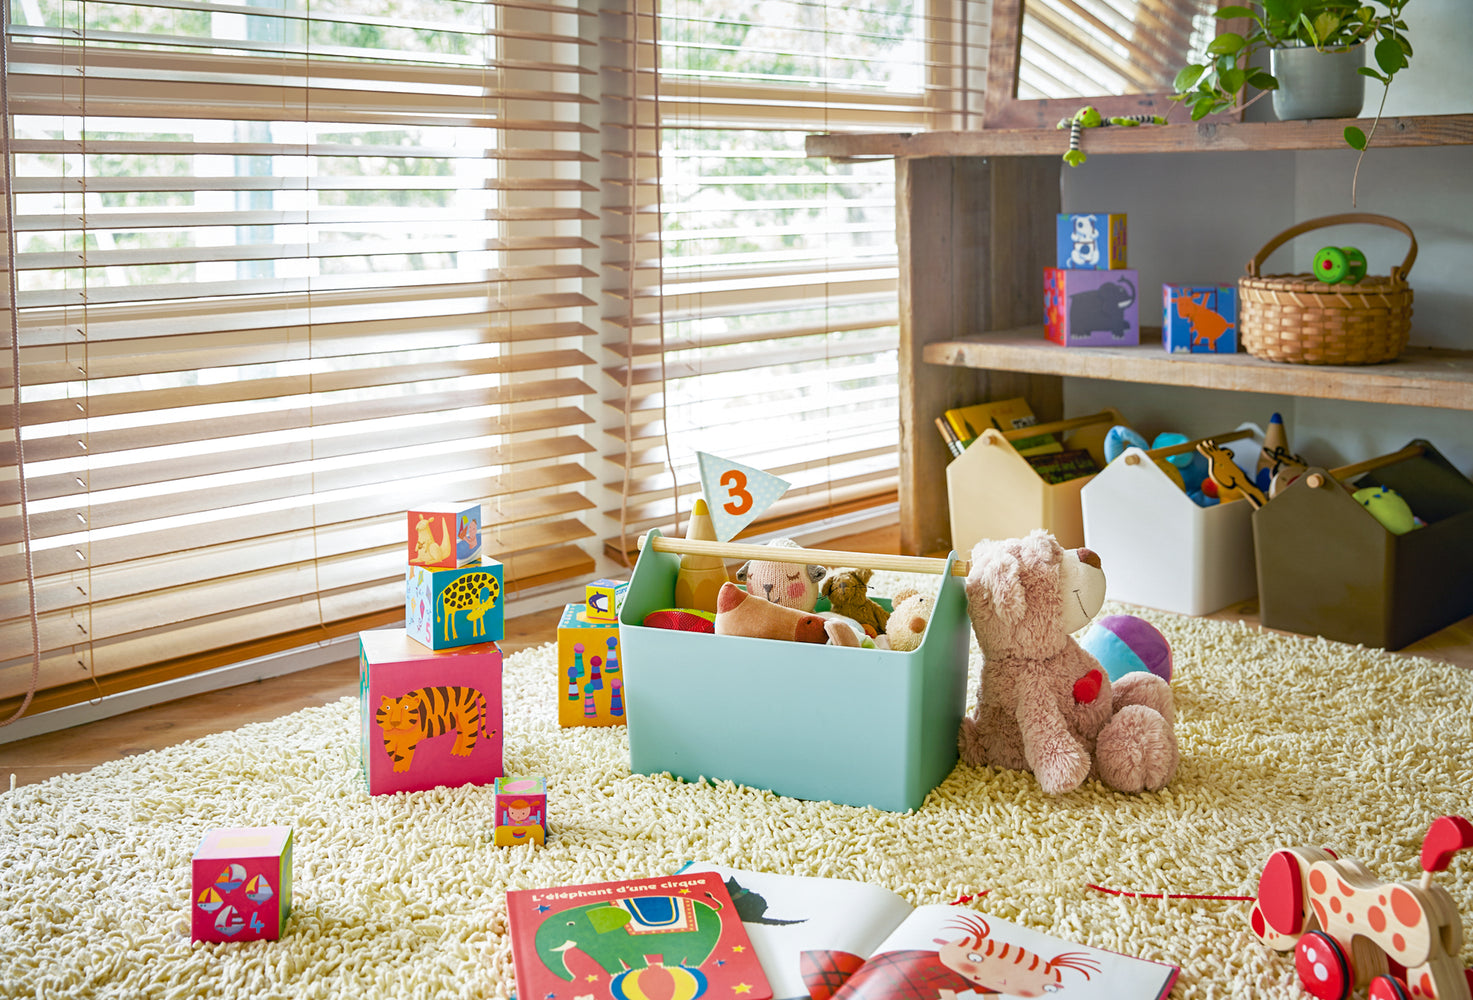 View 12 - Blue Storage Caddy holding toys in playroom by Yamazaki Home.